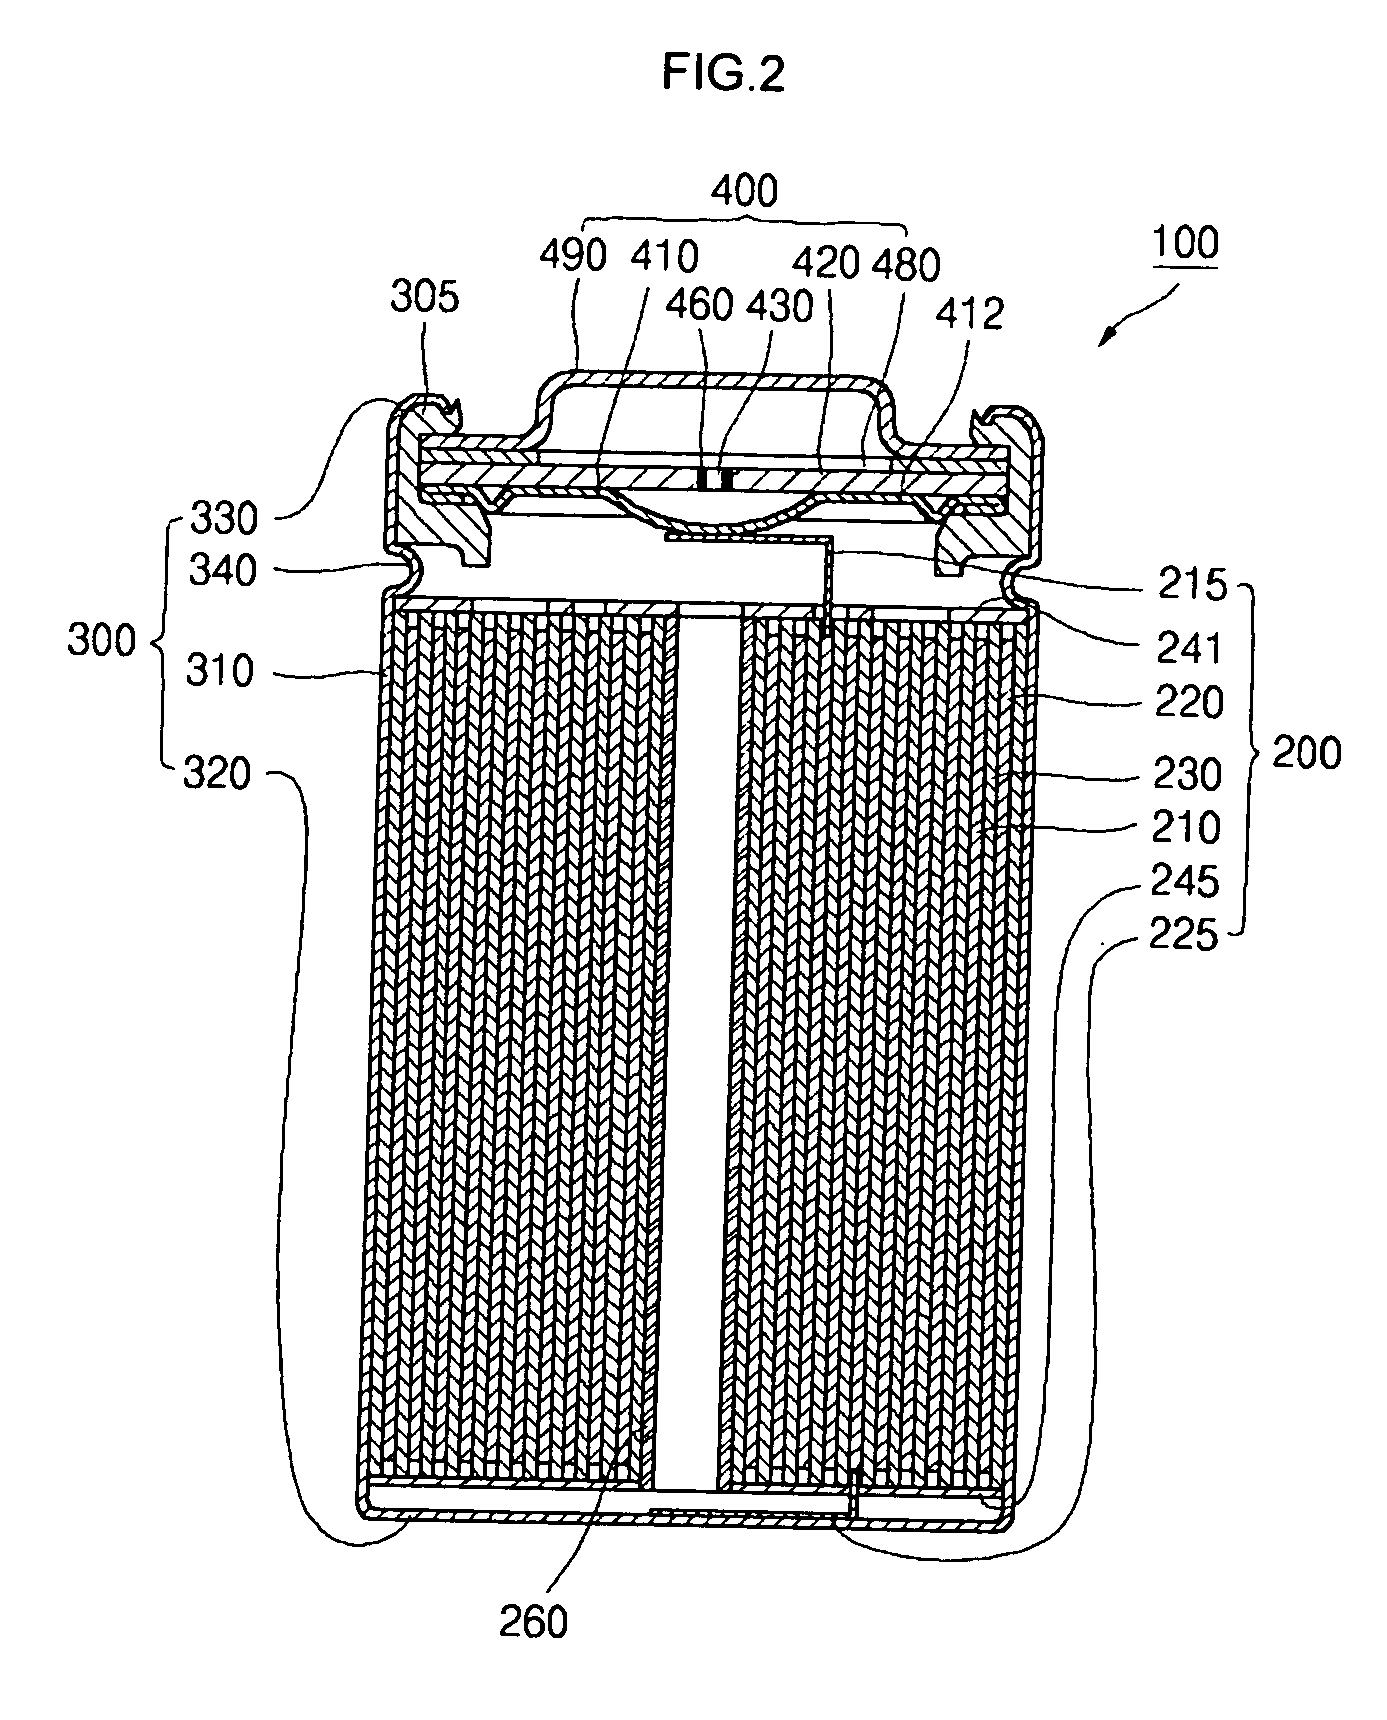 Lithium ion secondary battery